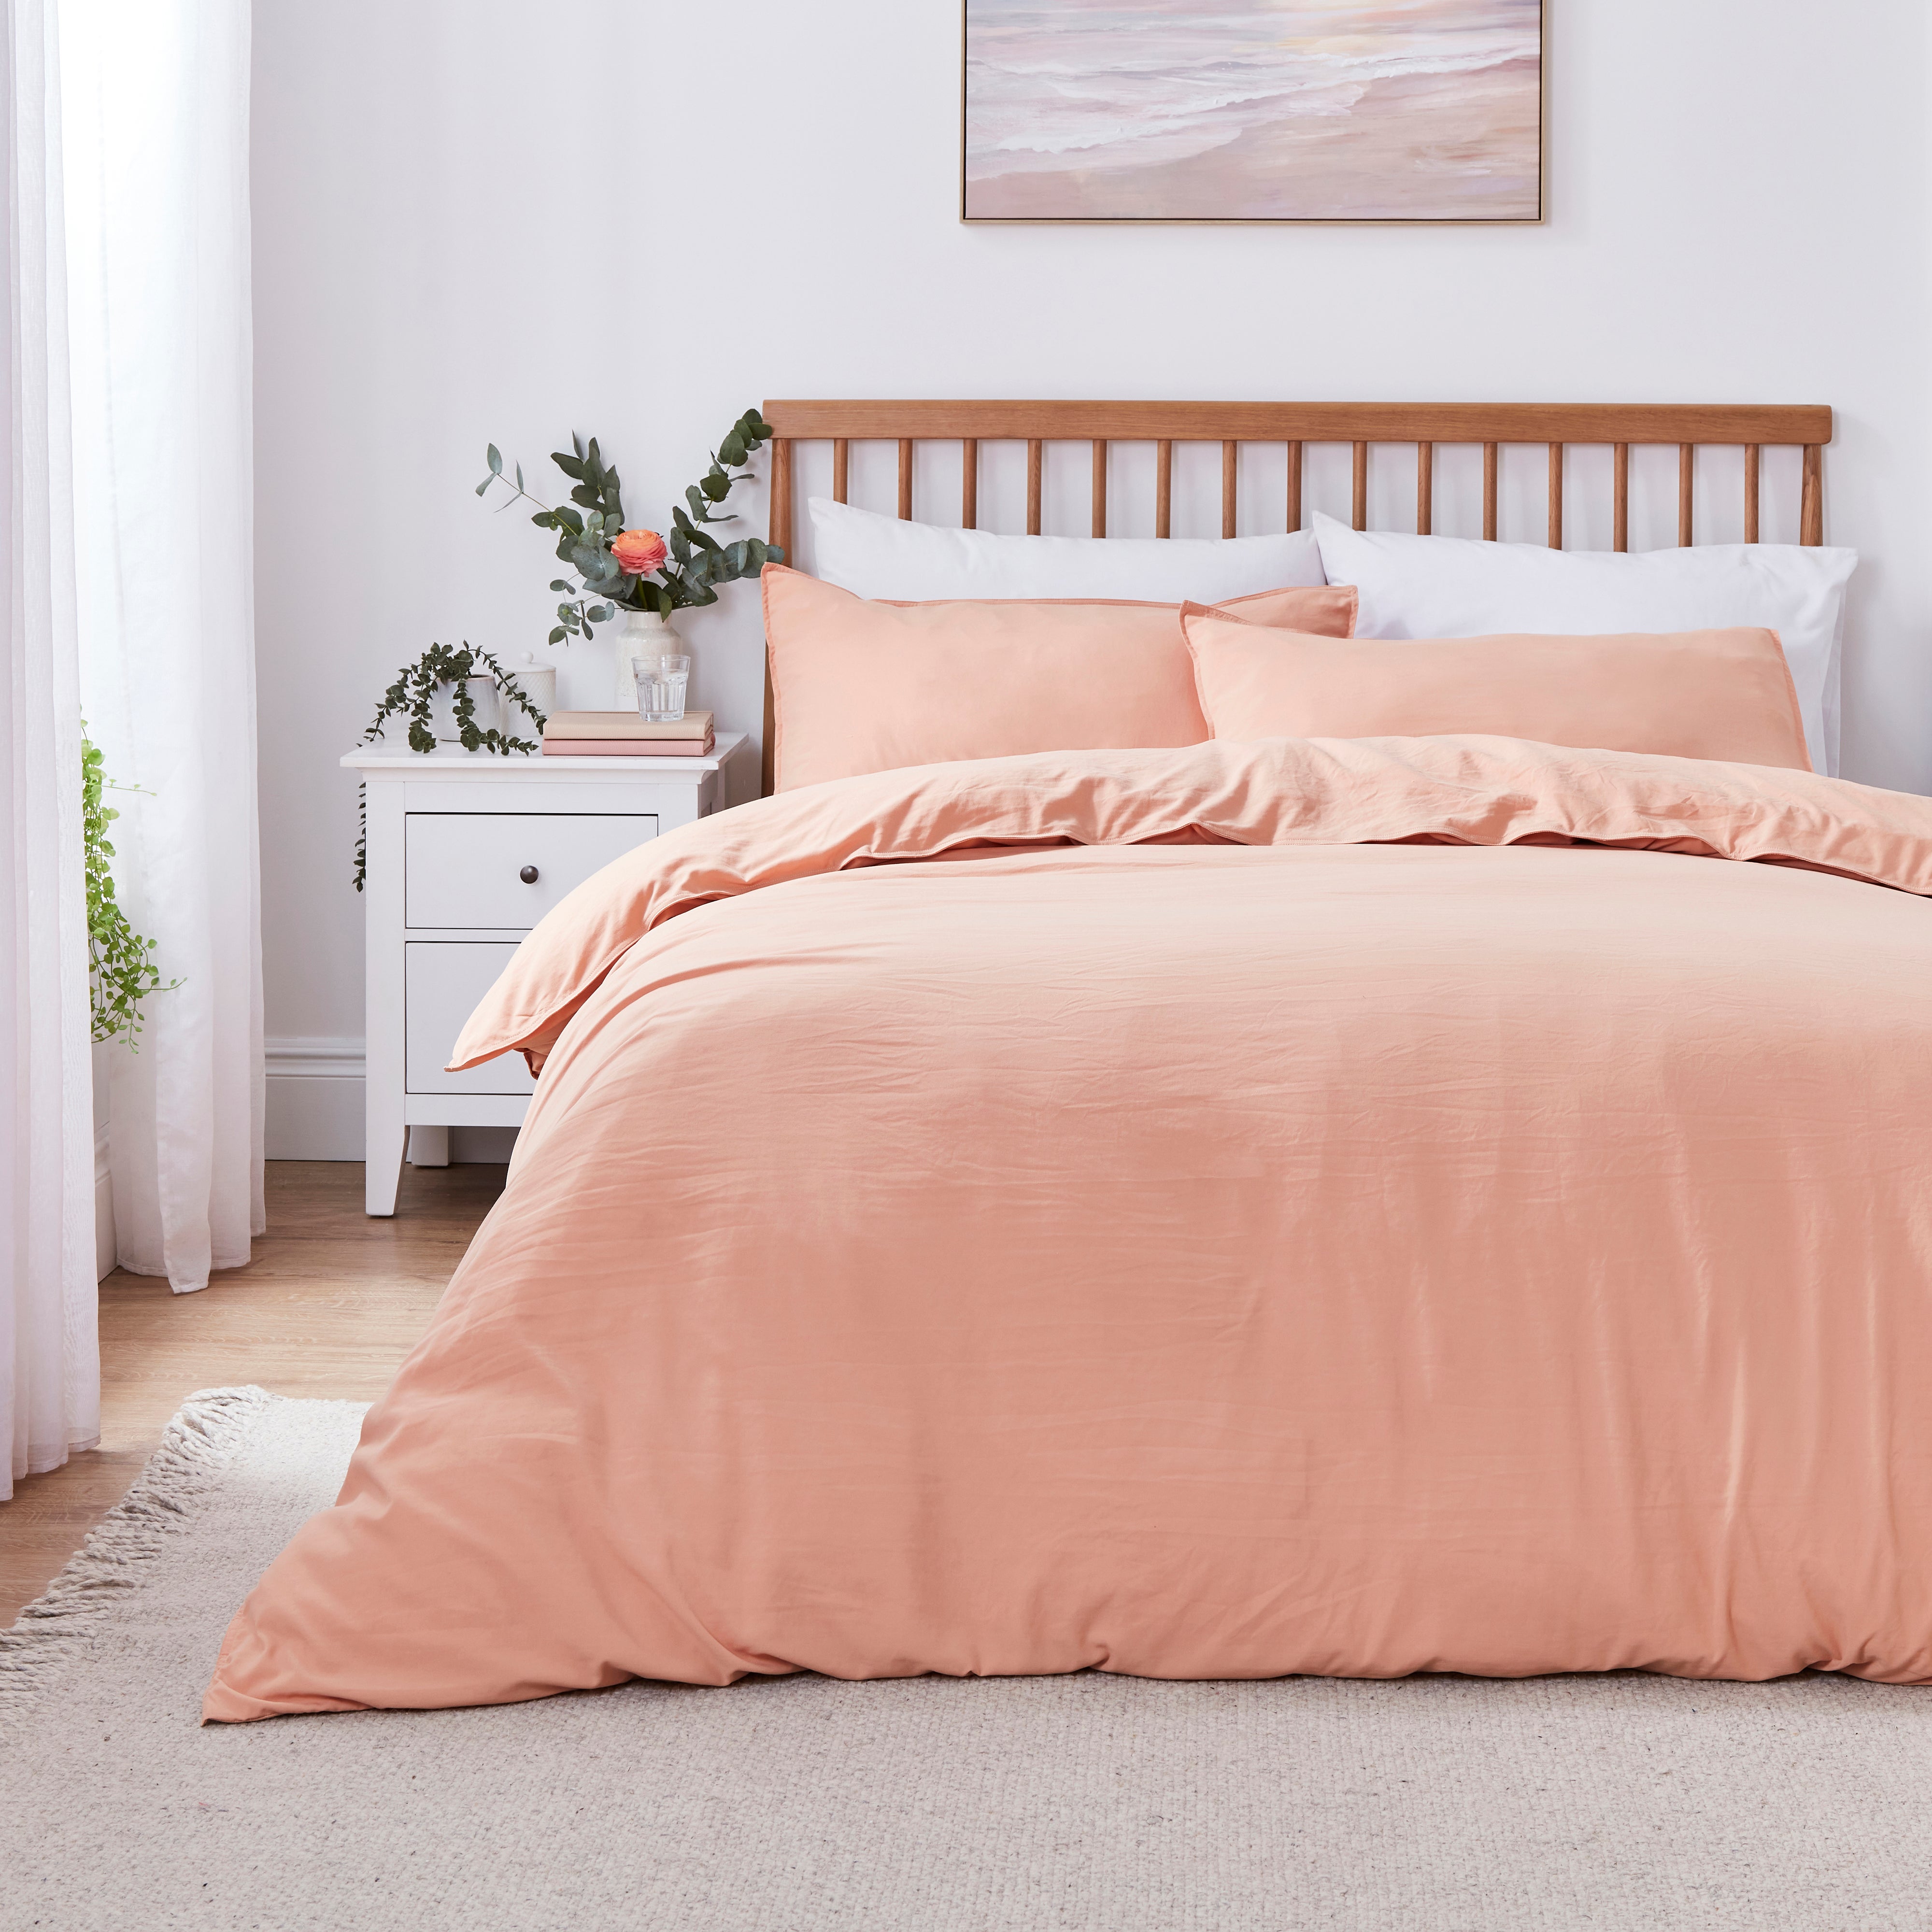 Washed Super Soft Duvet Cover And Pillowcase Set Apricot Apricot